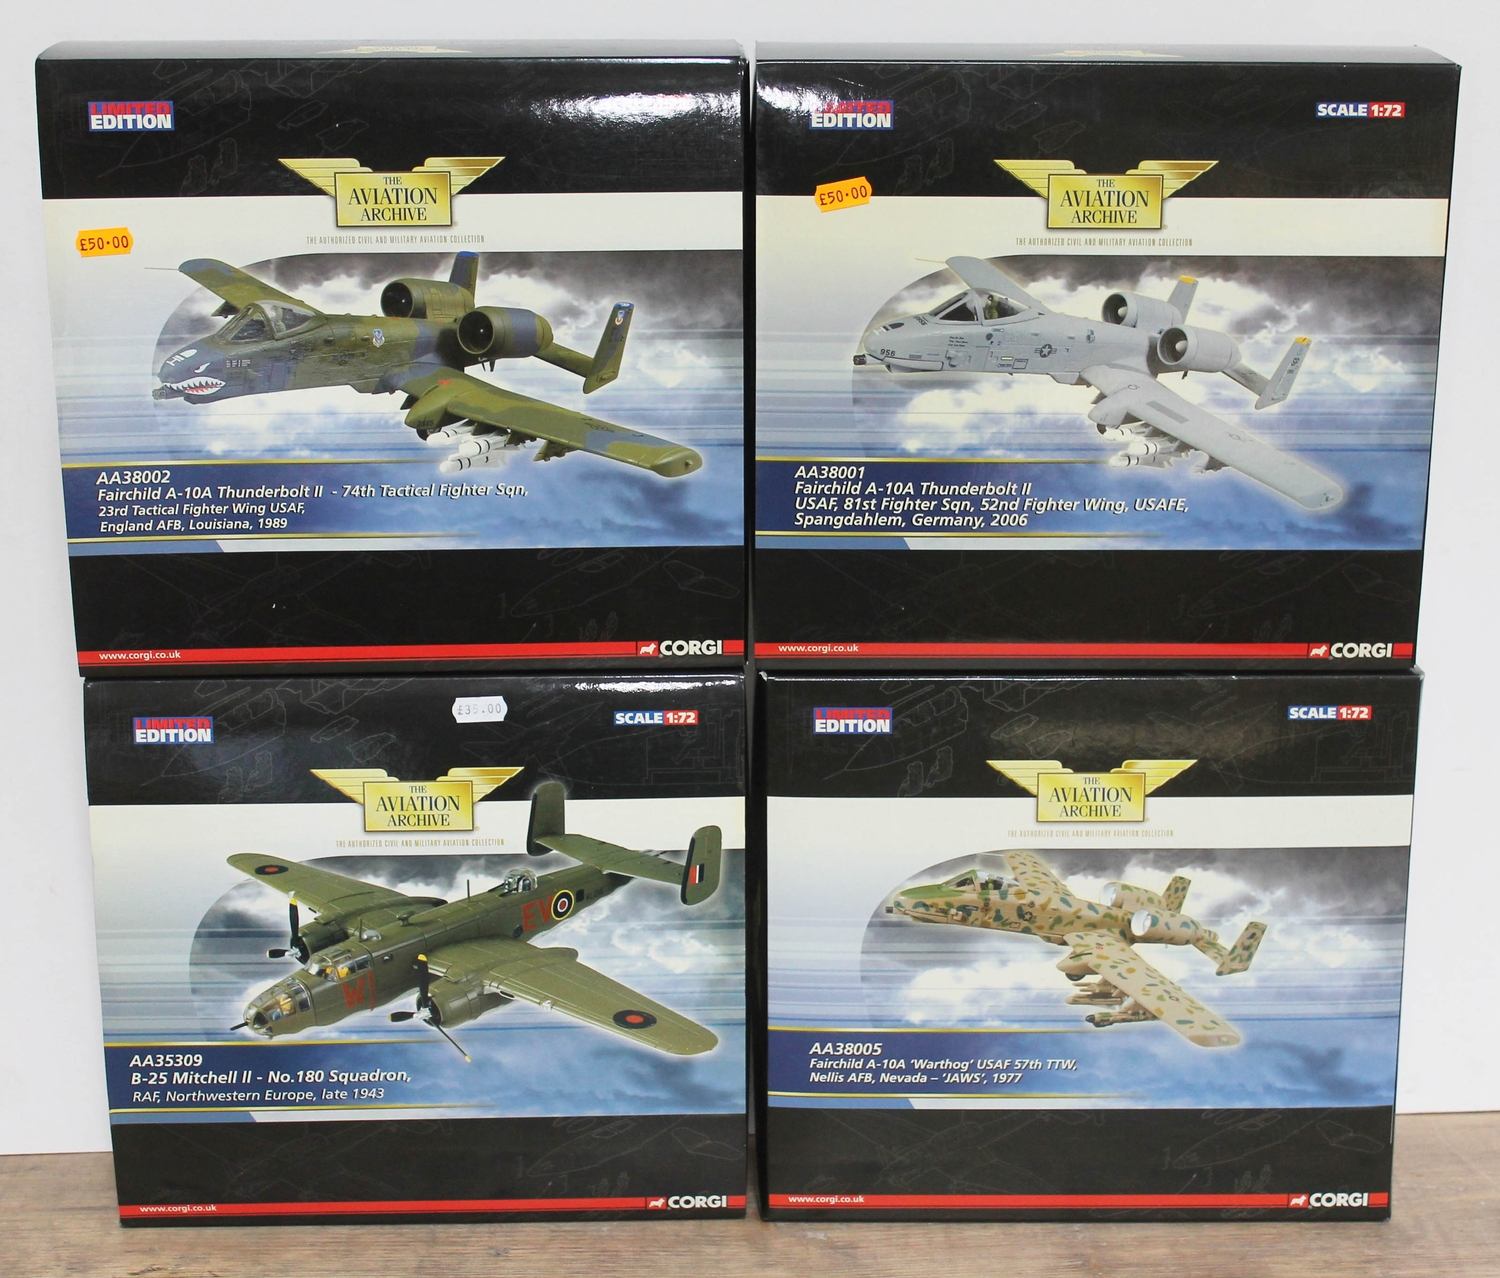 4x Corgi The Aviation Archive limited edition 1:72 scale die-cast